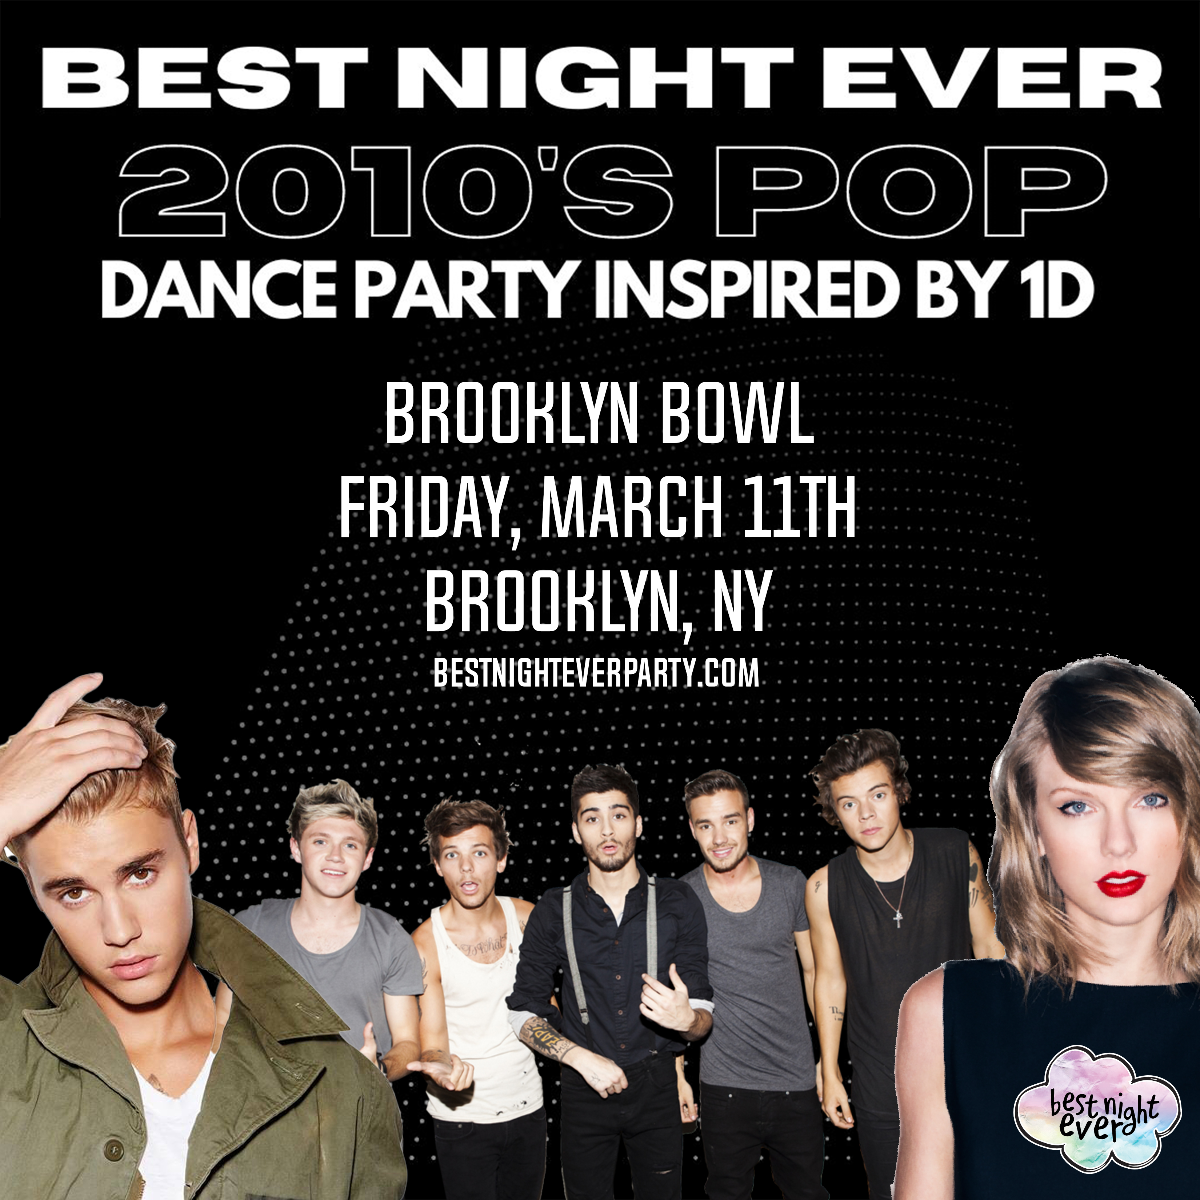 Best Night Ever: 2010's Pop Dance Party Inspired by One Direction